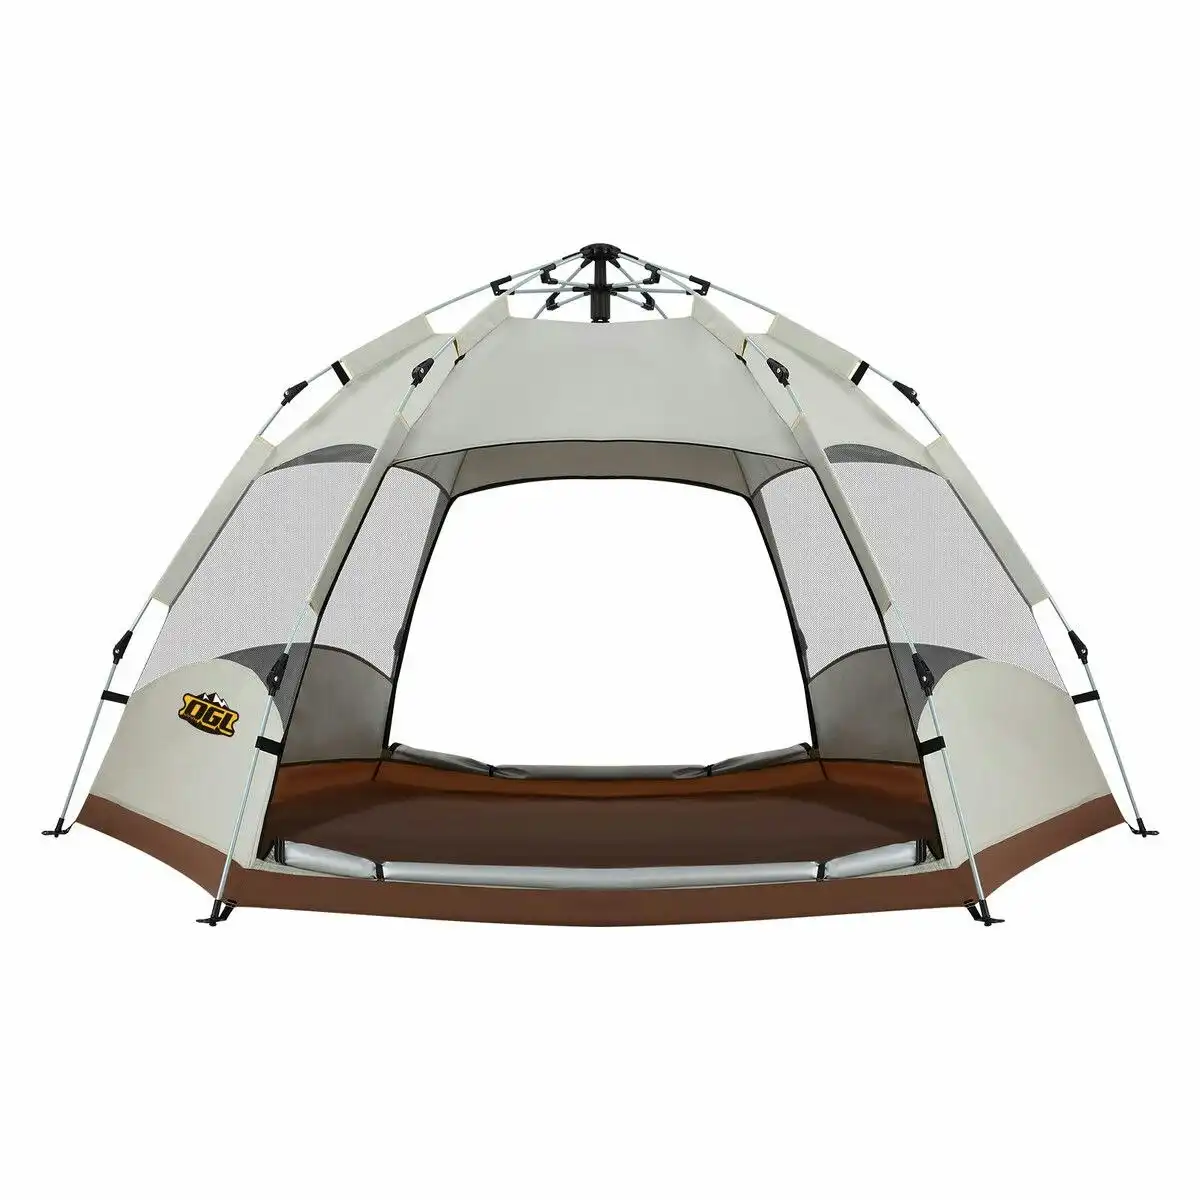 OGL 4 Man Beach Tent Shelter Camping Pop Up Instant Dome Family Shade Hiking Sun Rain Picnic Outdoor 240x240x135cm Creamy White